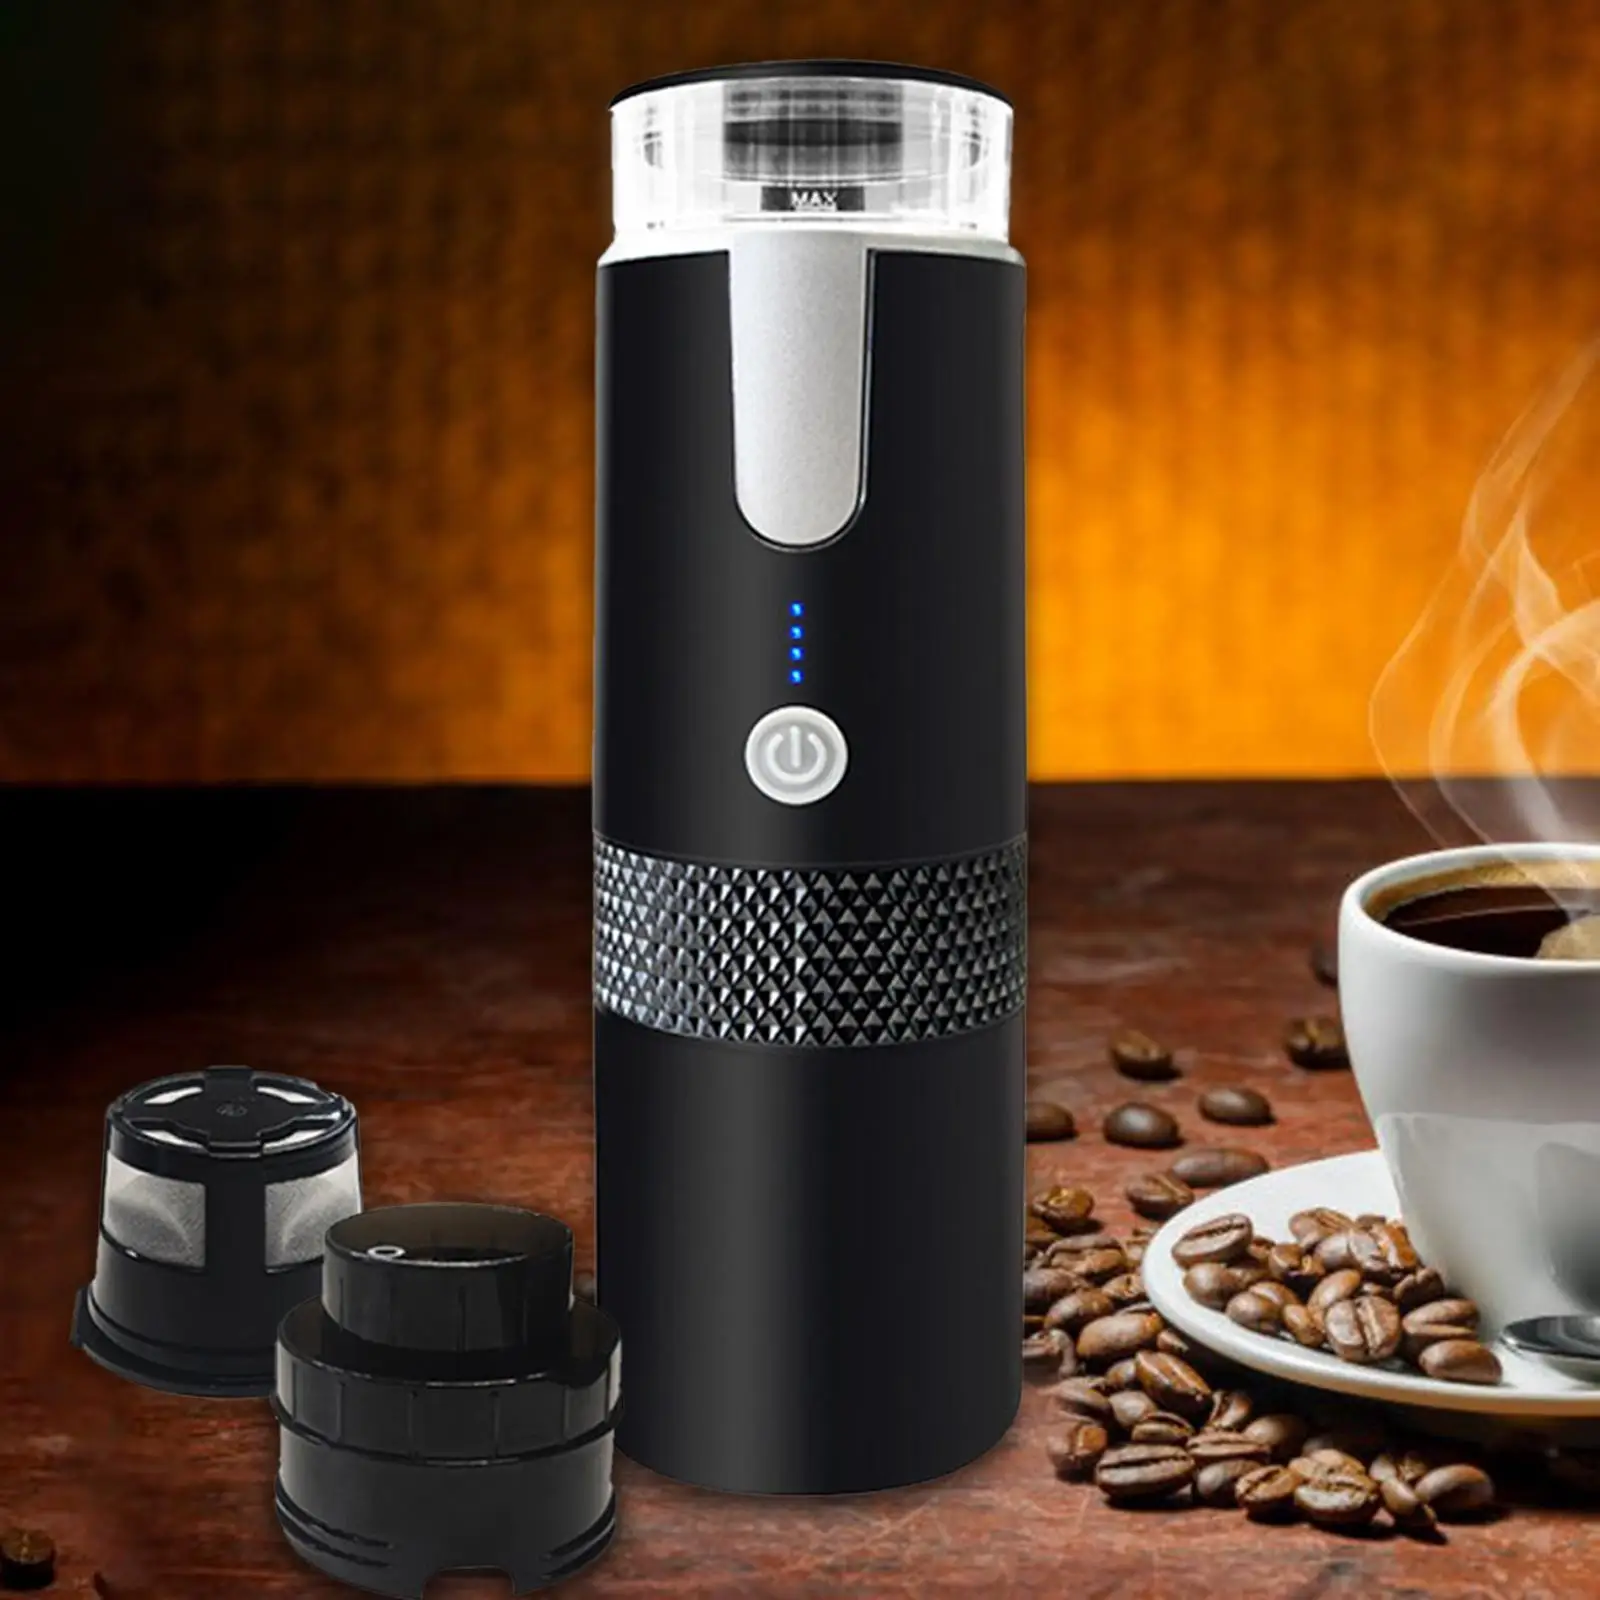 Coffee Machine Rechargeable USB Charging Mini USB Electric Coffee Maker Machine Electric Coffee Maker for Office Travel Home